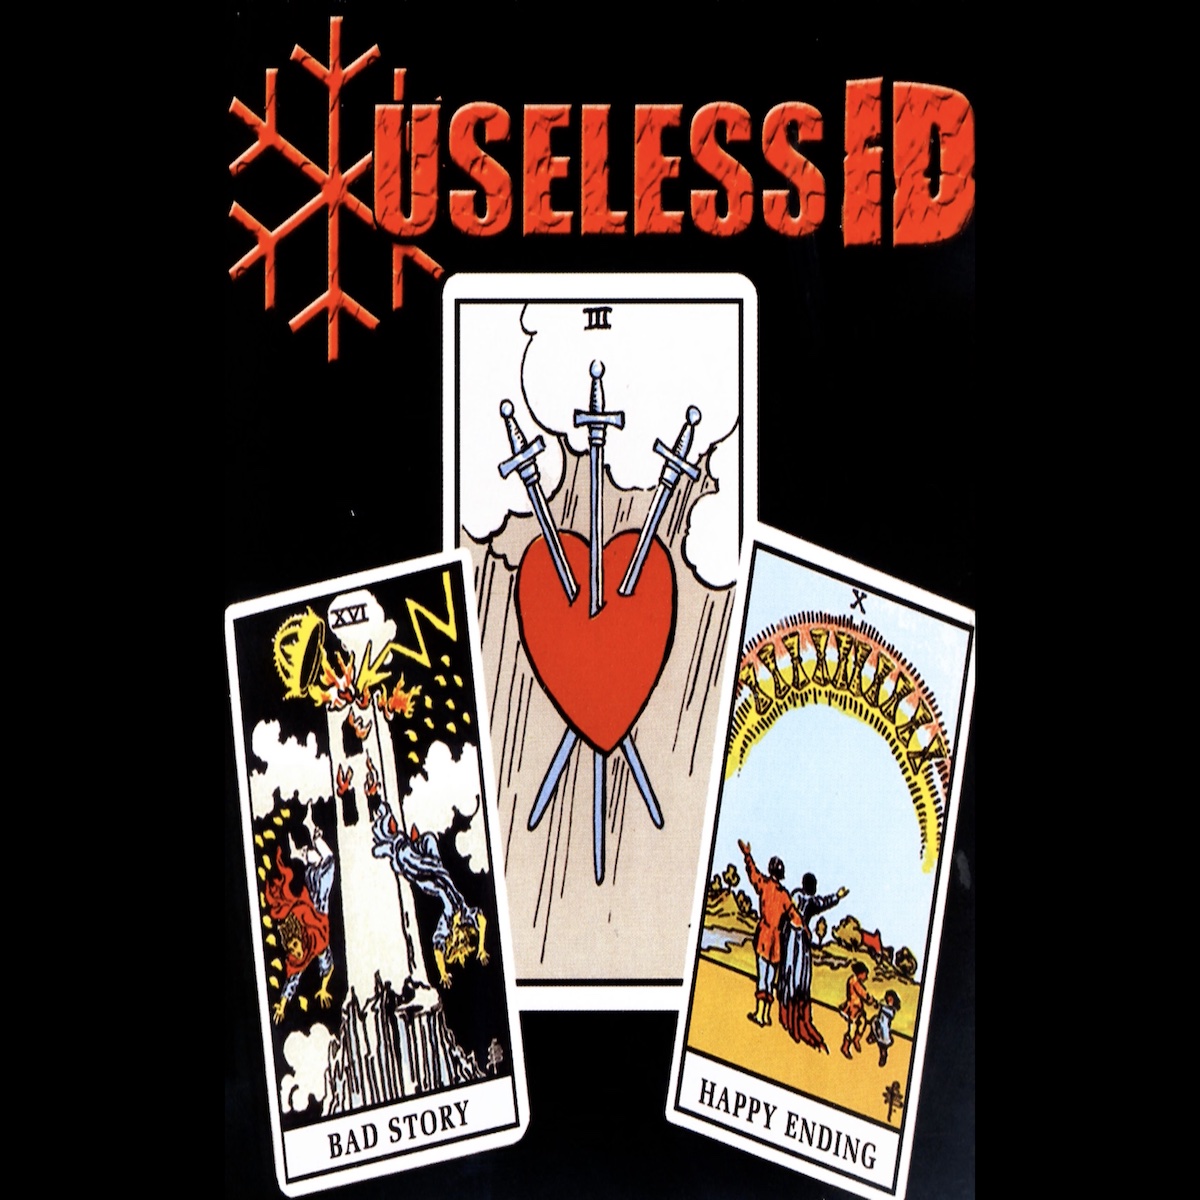 Classic Album Review: Useless I.D. | Bad Story, Happy Ending